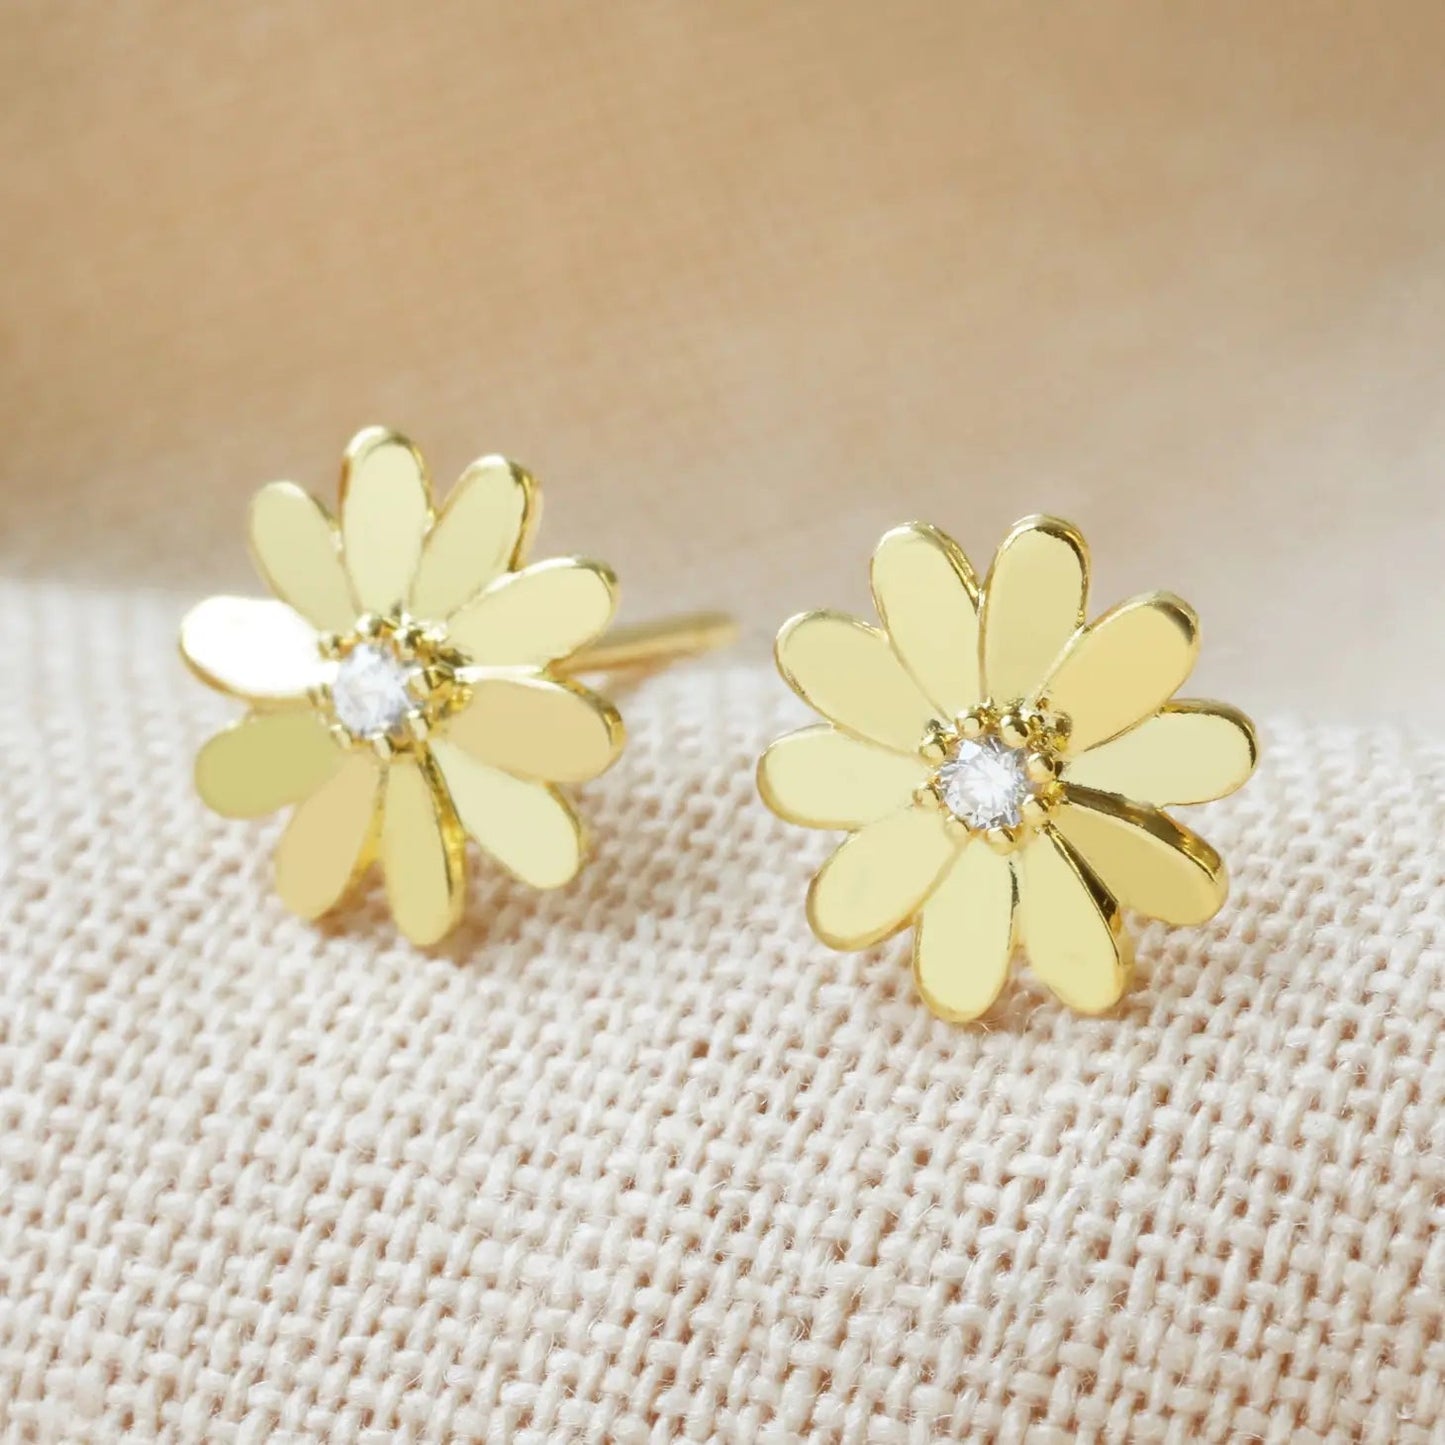 Daisy Stud Earrings in Gold | 14K Gold Plated Brass and Real Freshwater Pearls